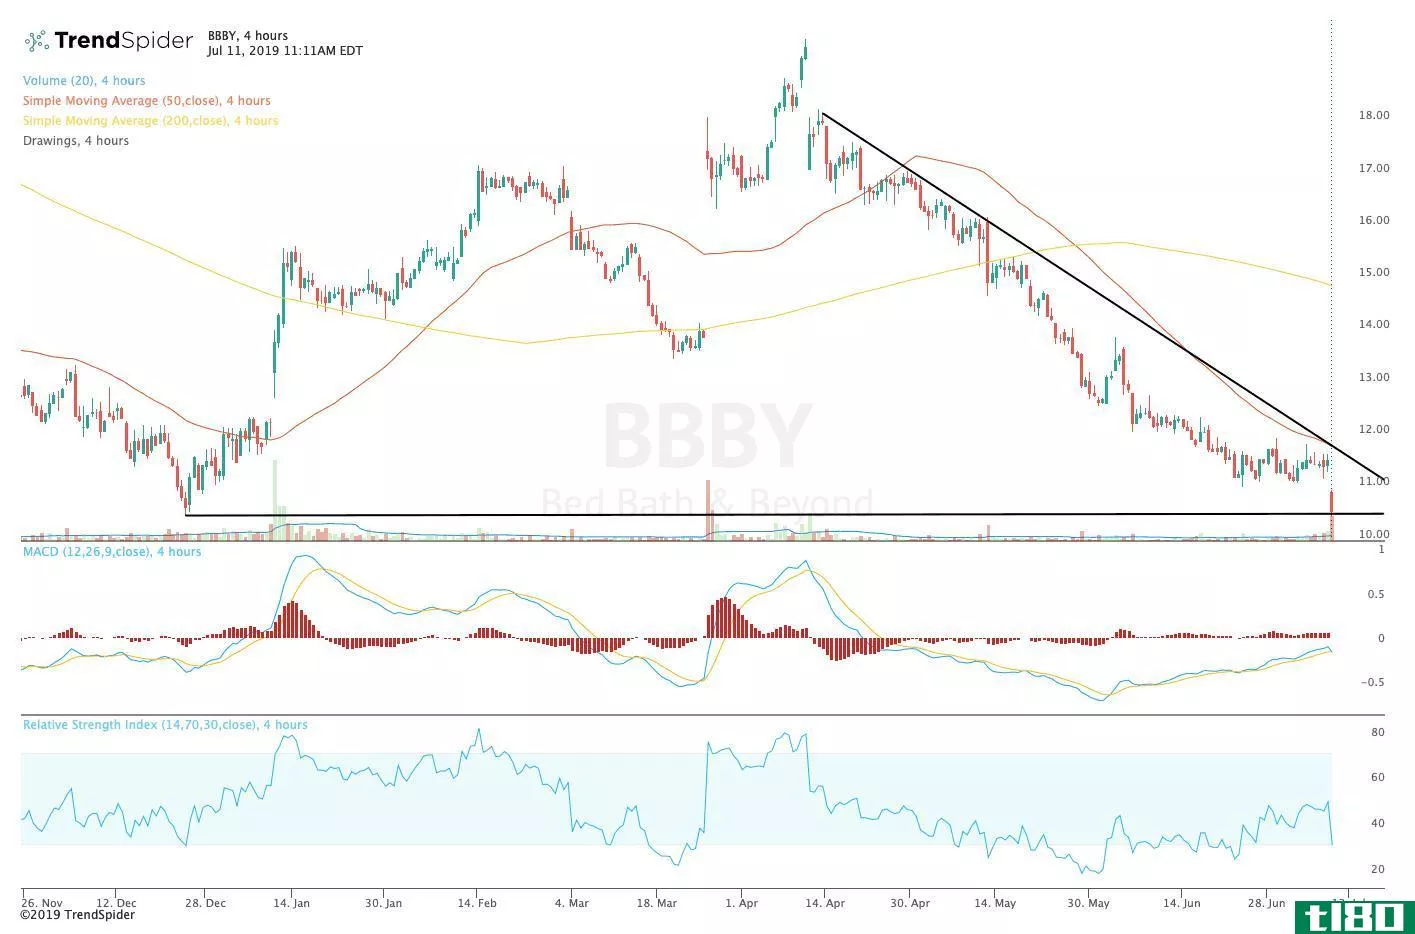 Chart showing the share price performance of Bed Bath & Beyond Inc. (BBBY)